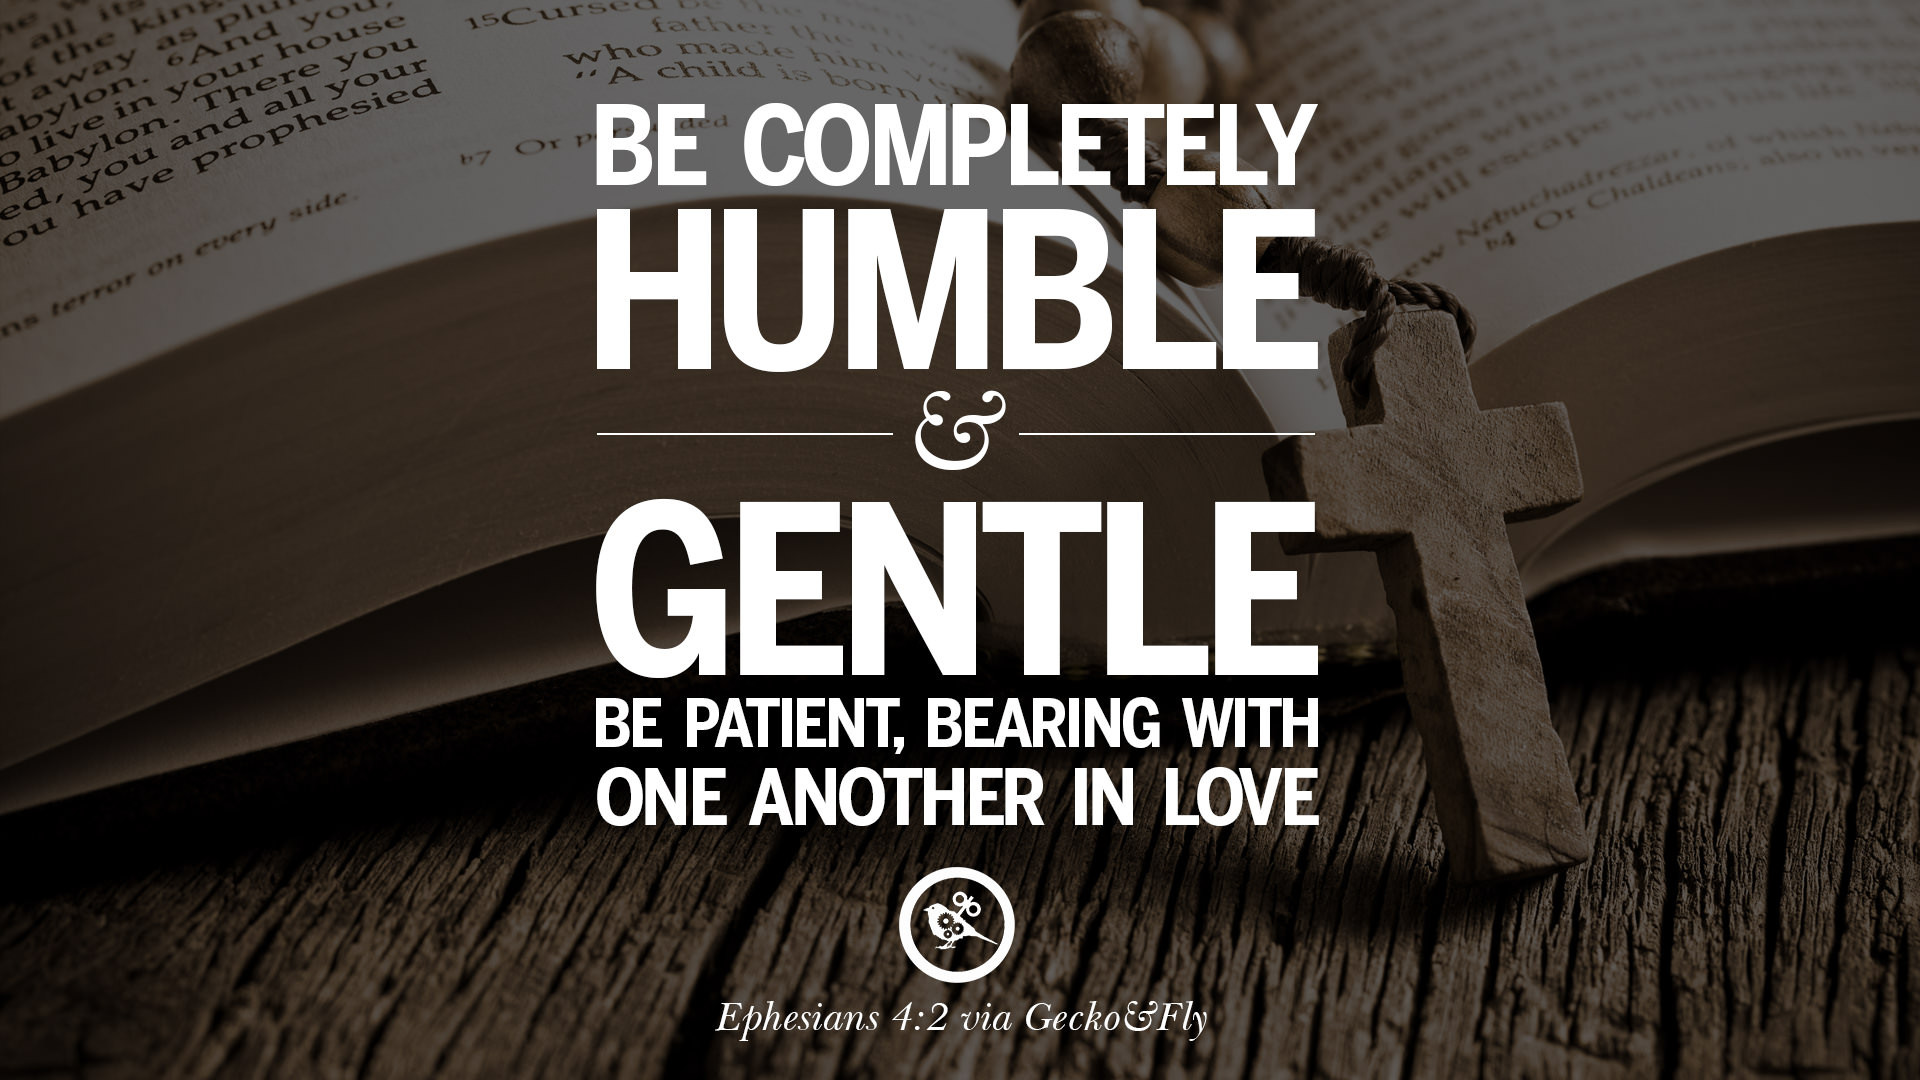 Relationships Quotes From The Bible
 7 Bible Verses About Love Relationships Marriage Family